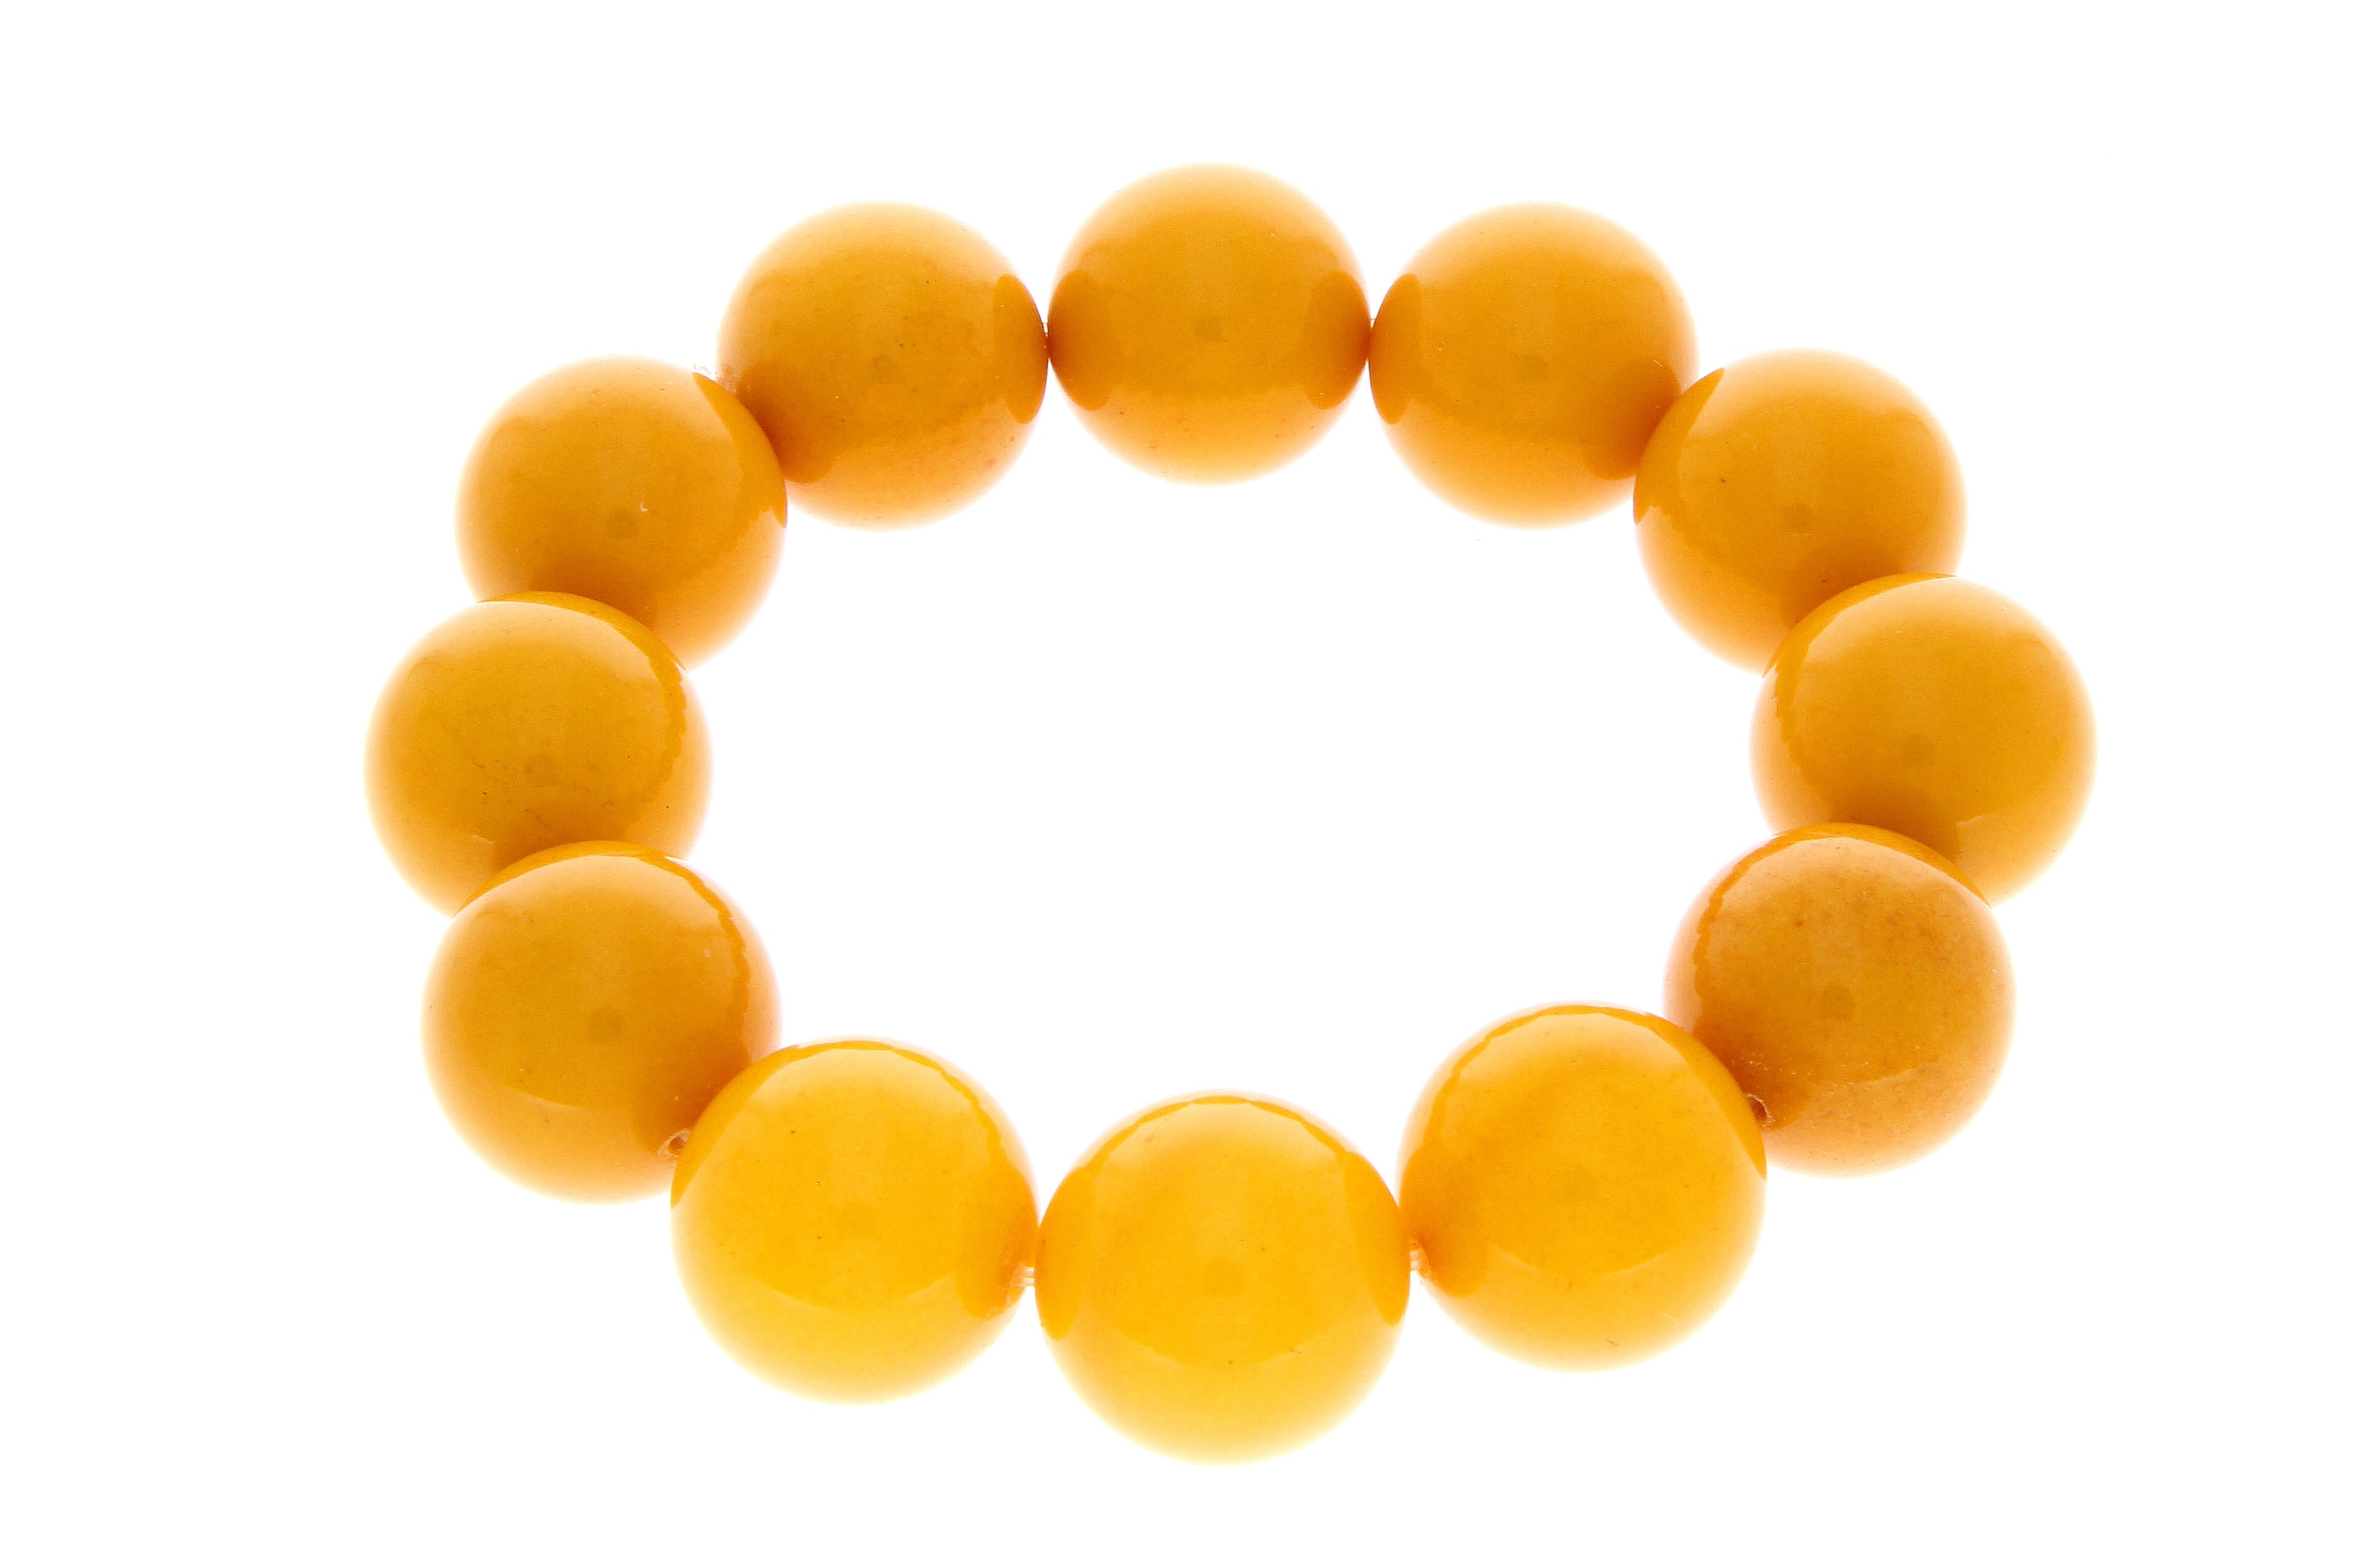 Exclusive perfect ball Genuine Baltic Amber Bracelet - BT0122